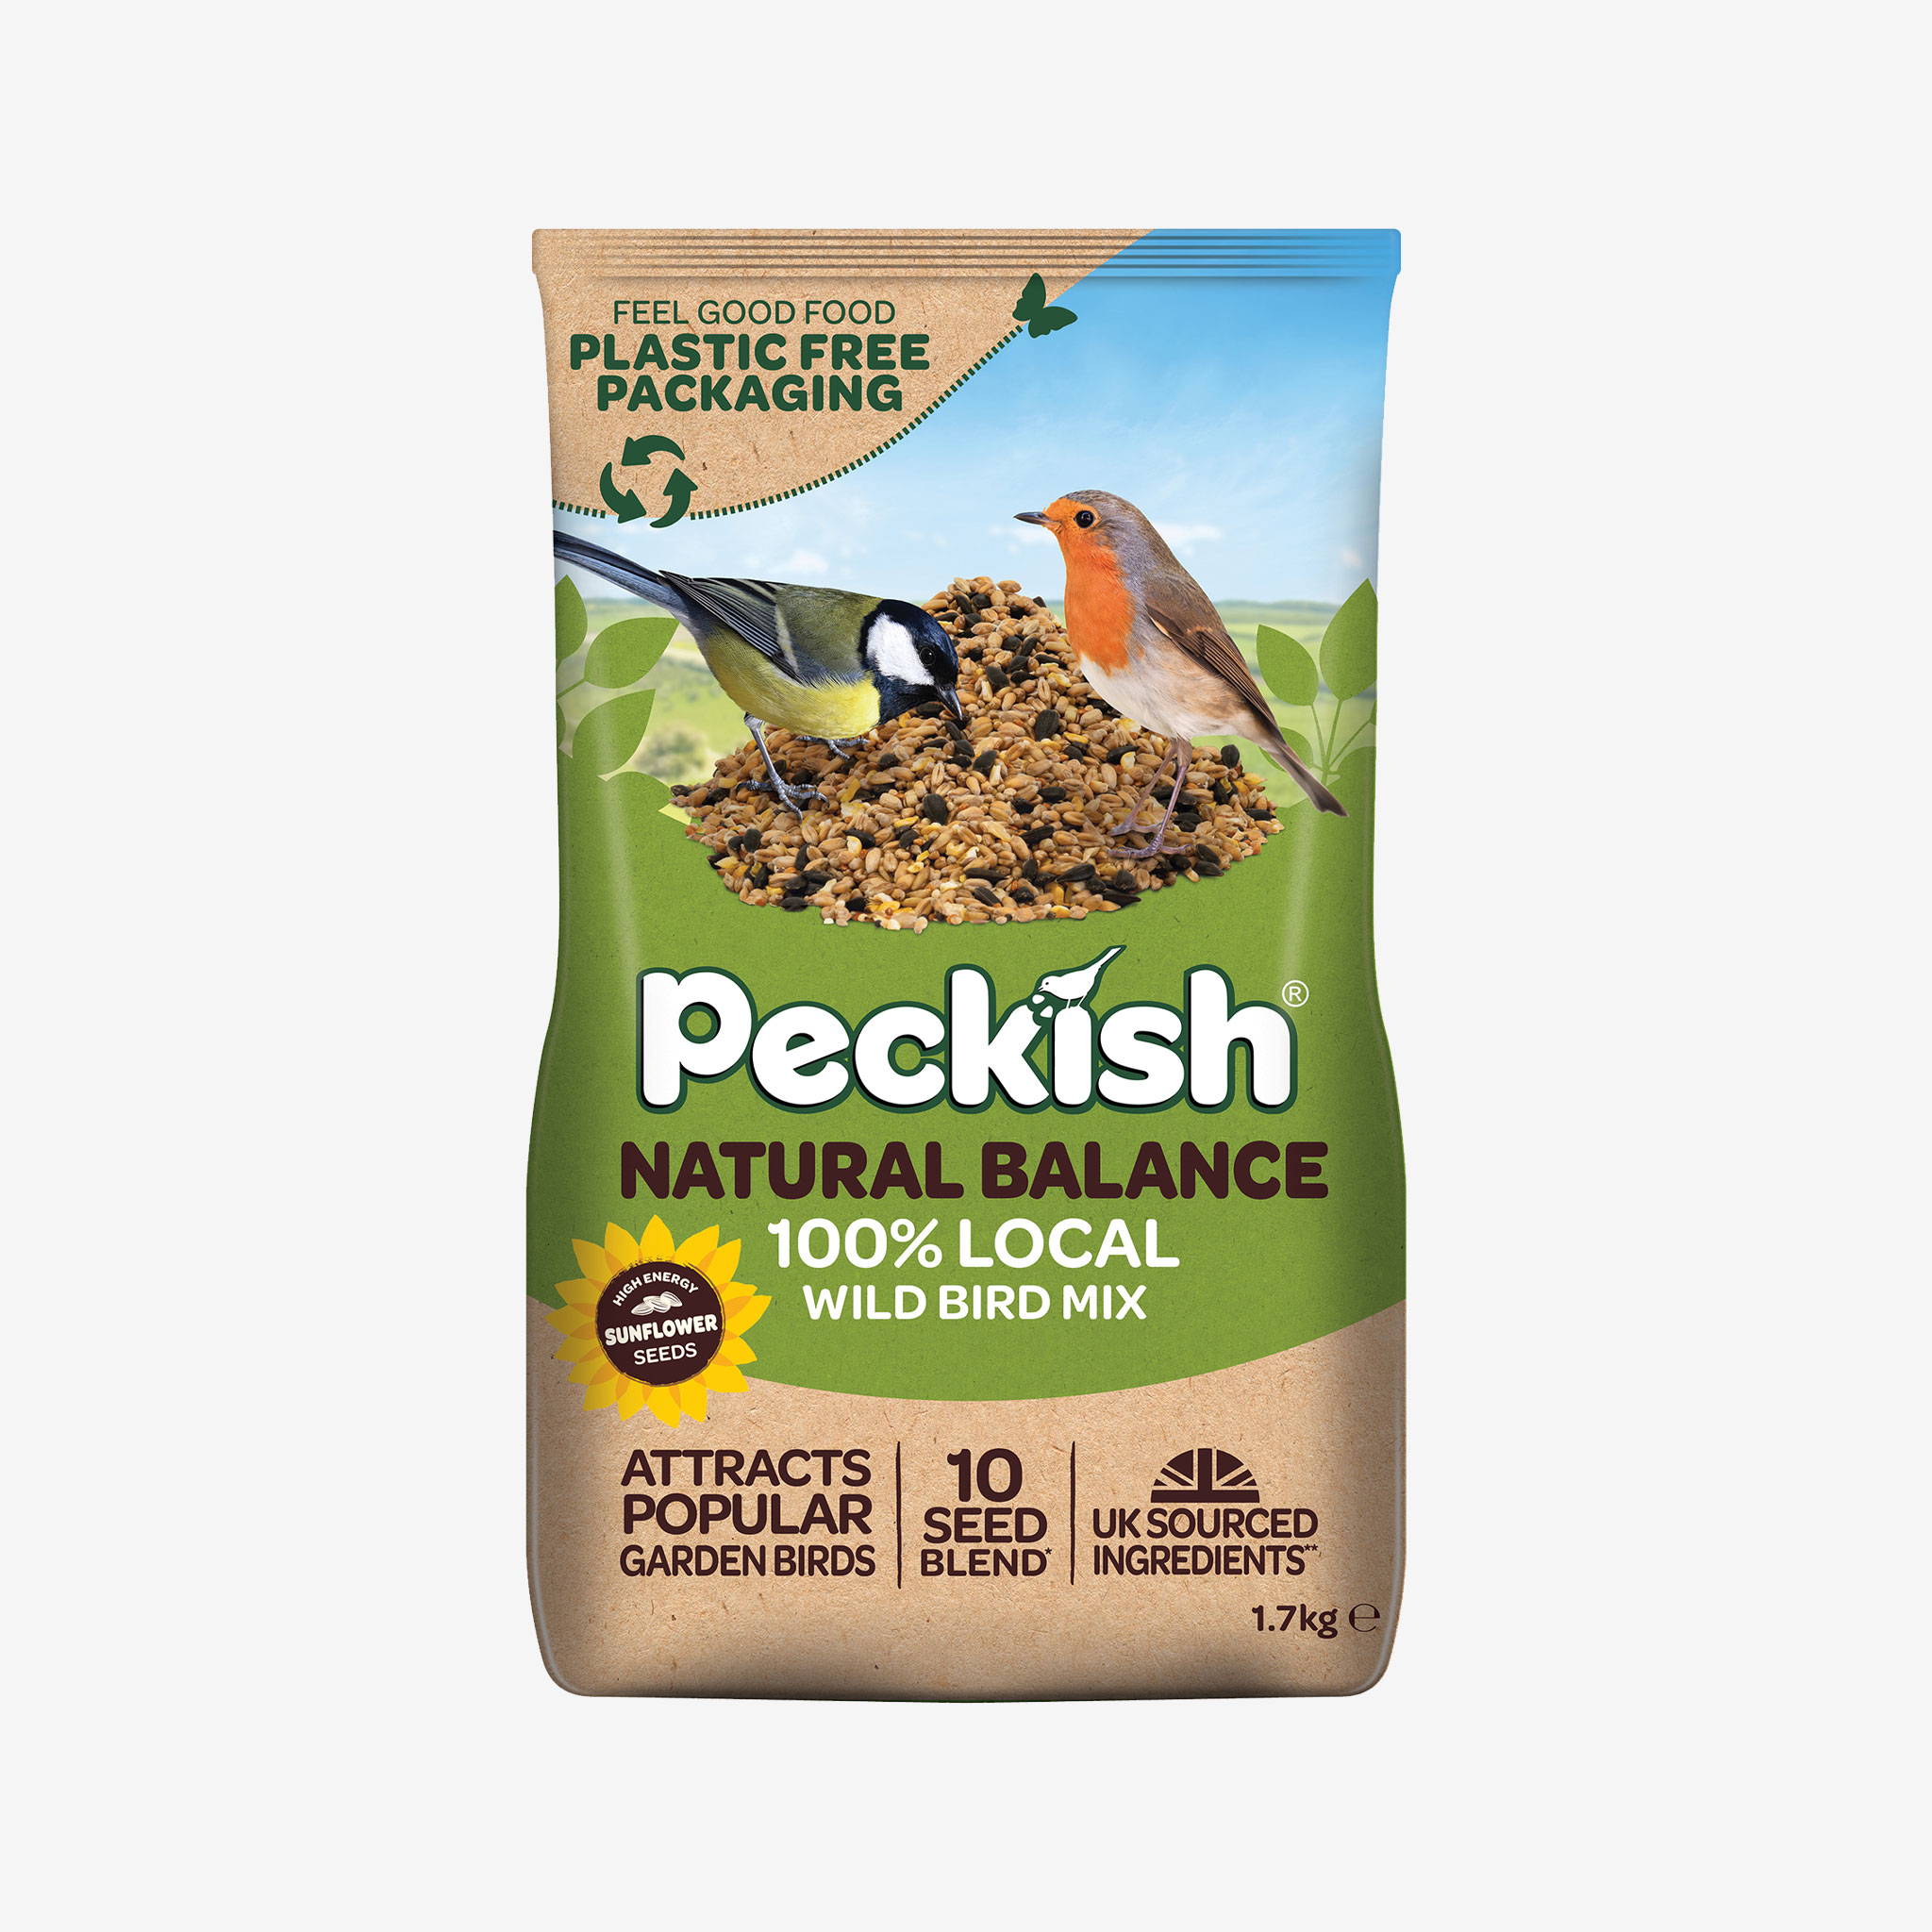 Peckish Natural Balance Seed Mix in packaging